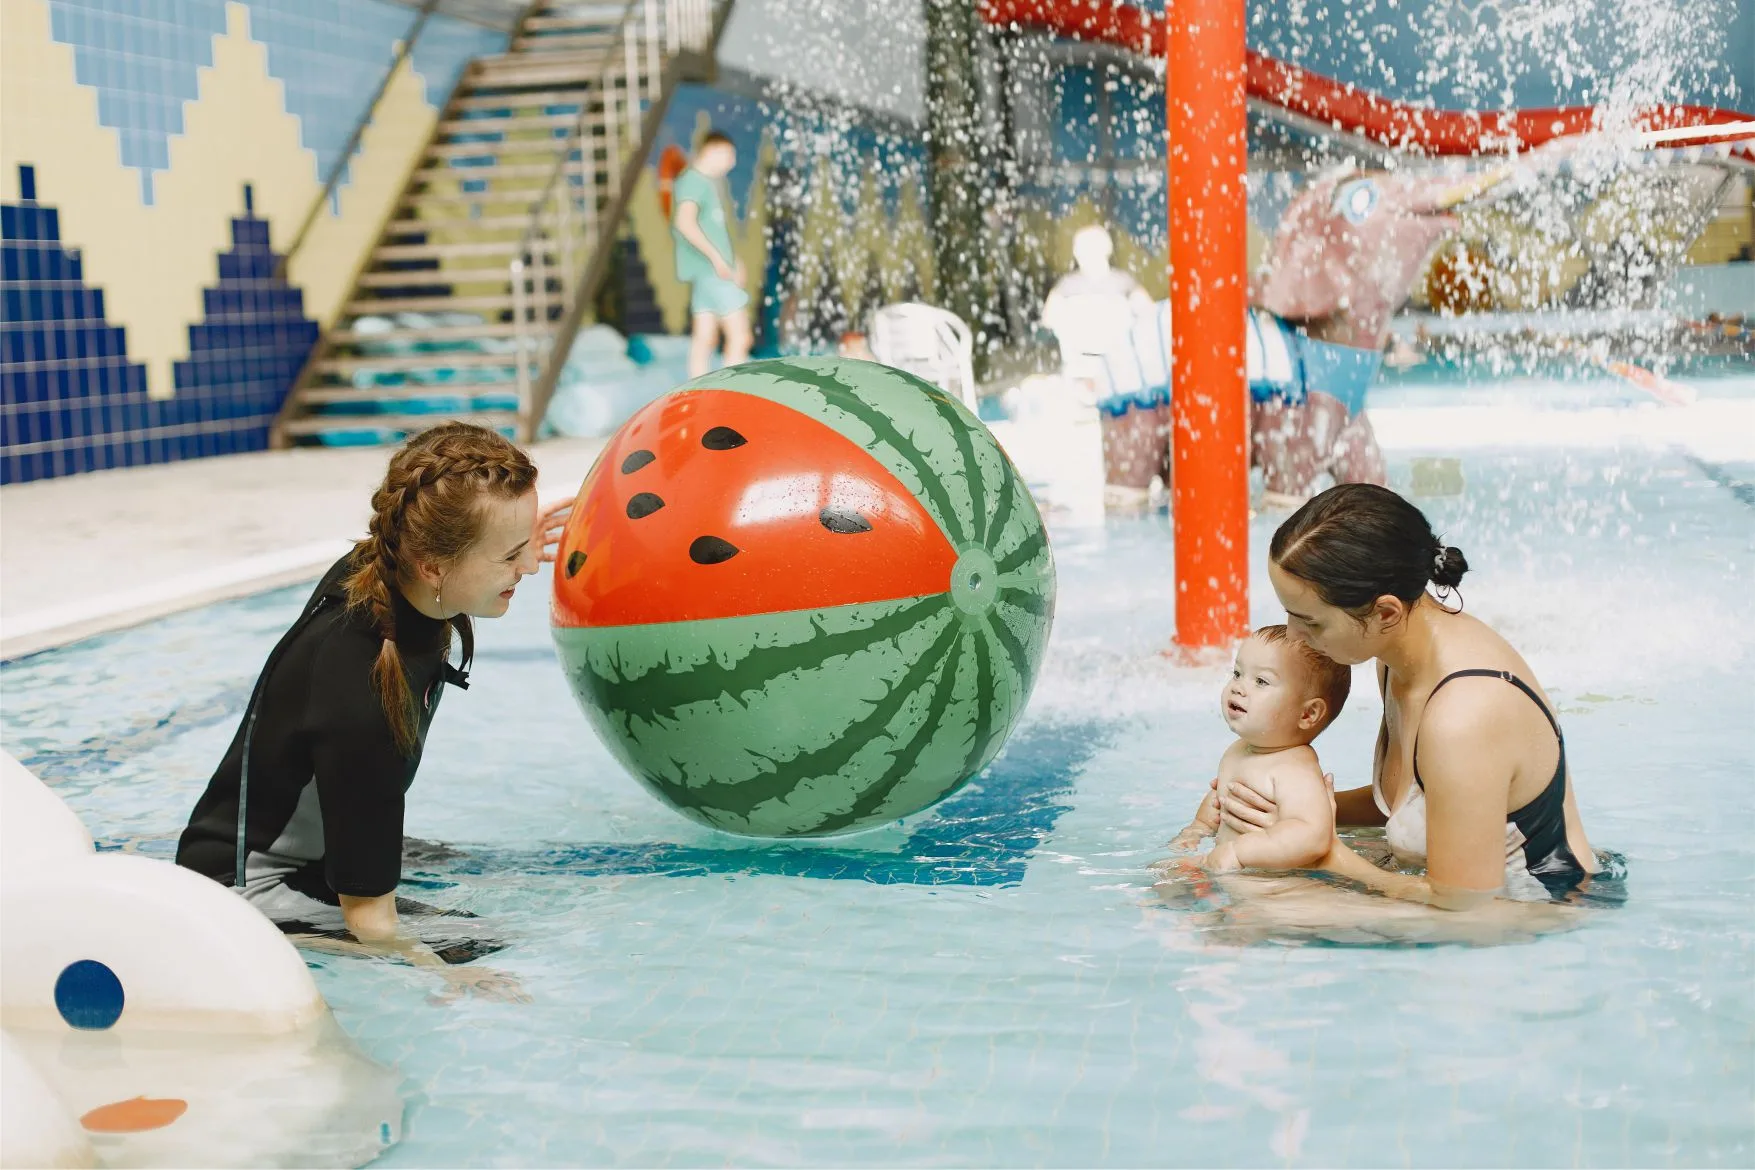 Development and implementation of a new payment system at water parks